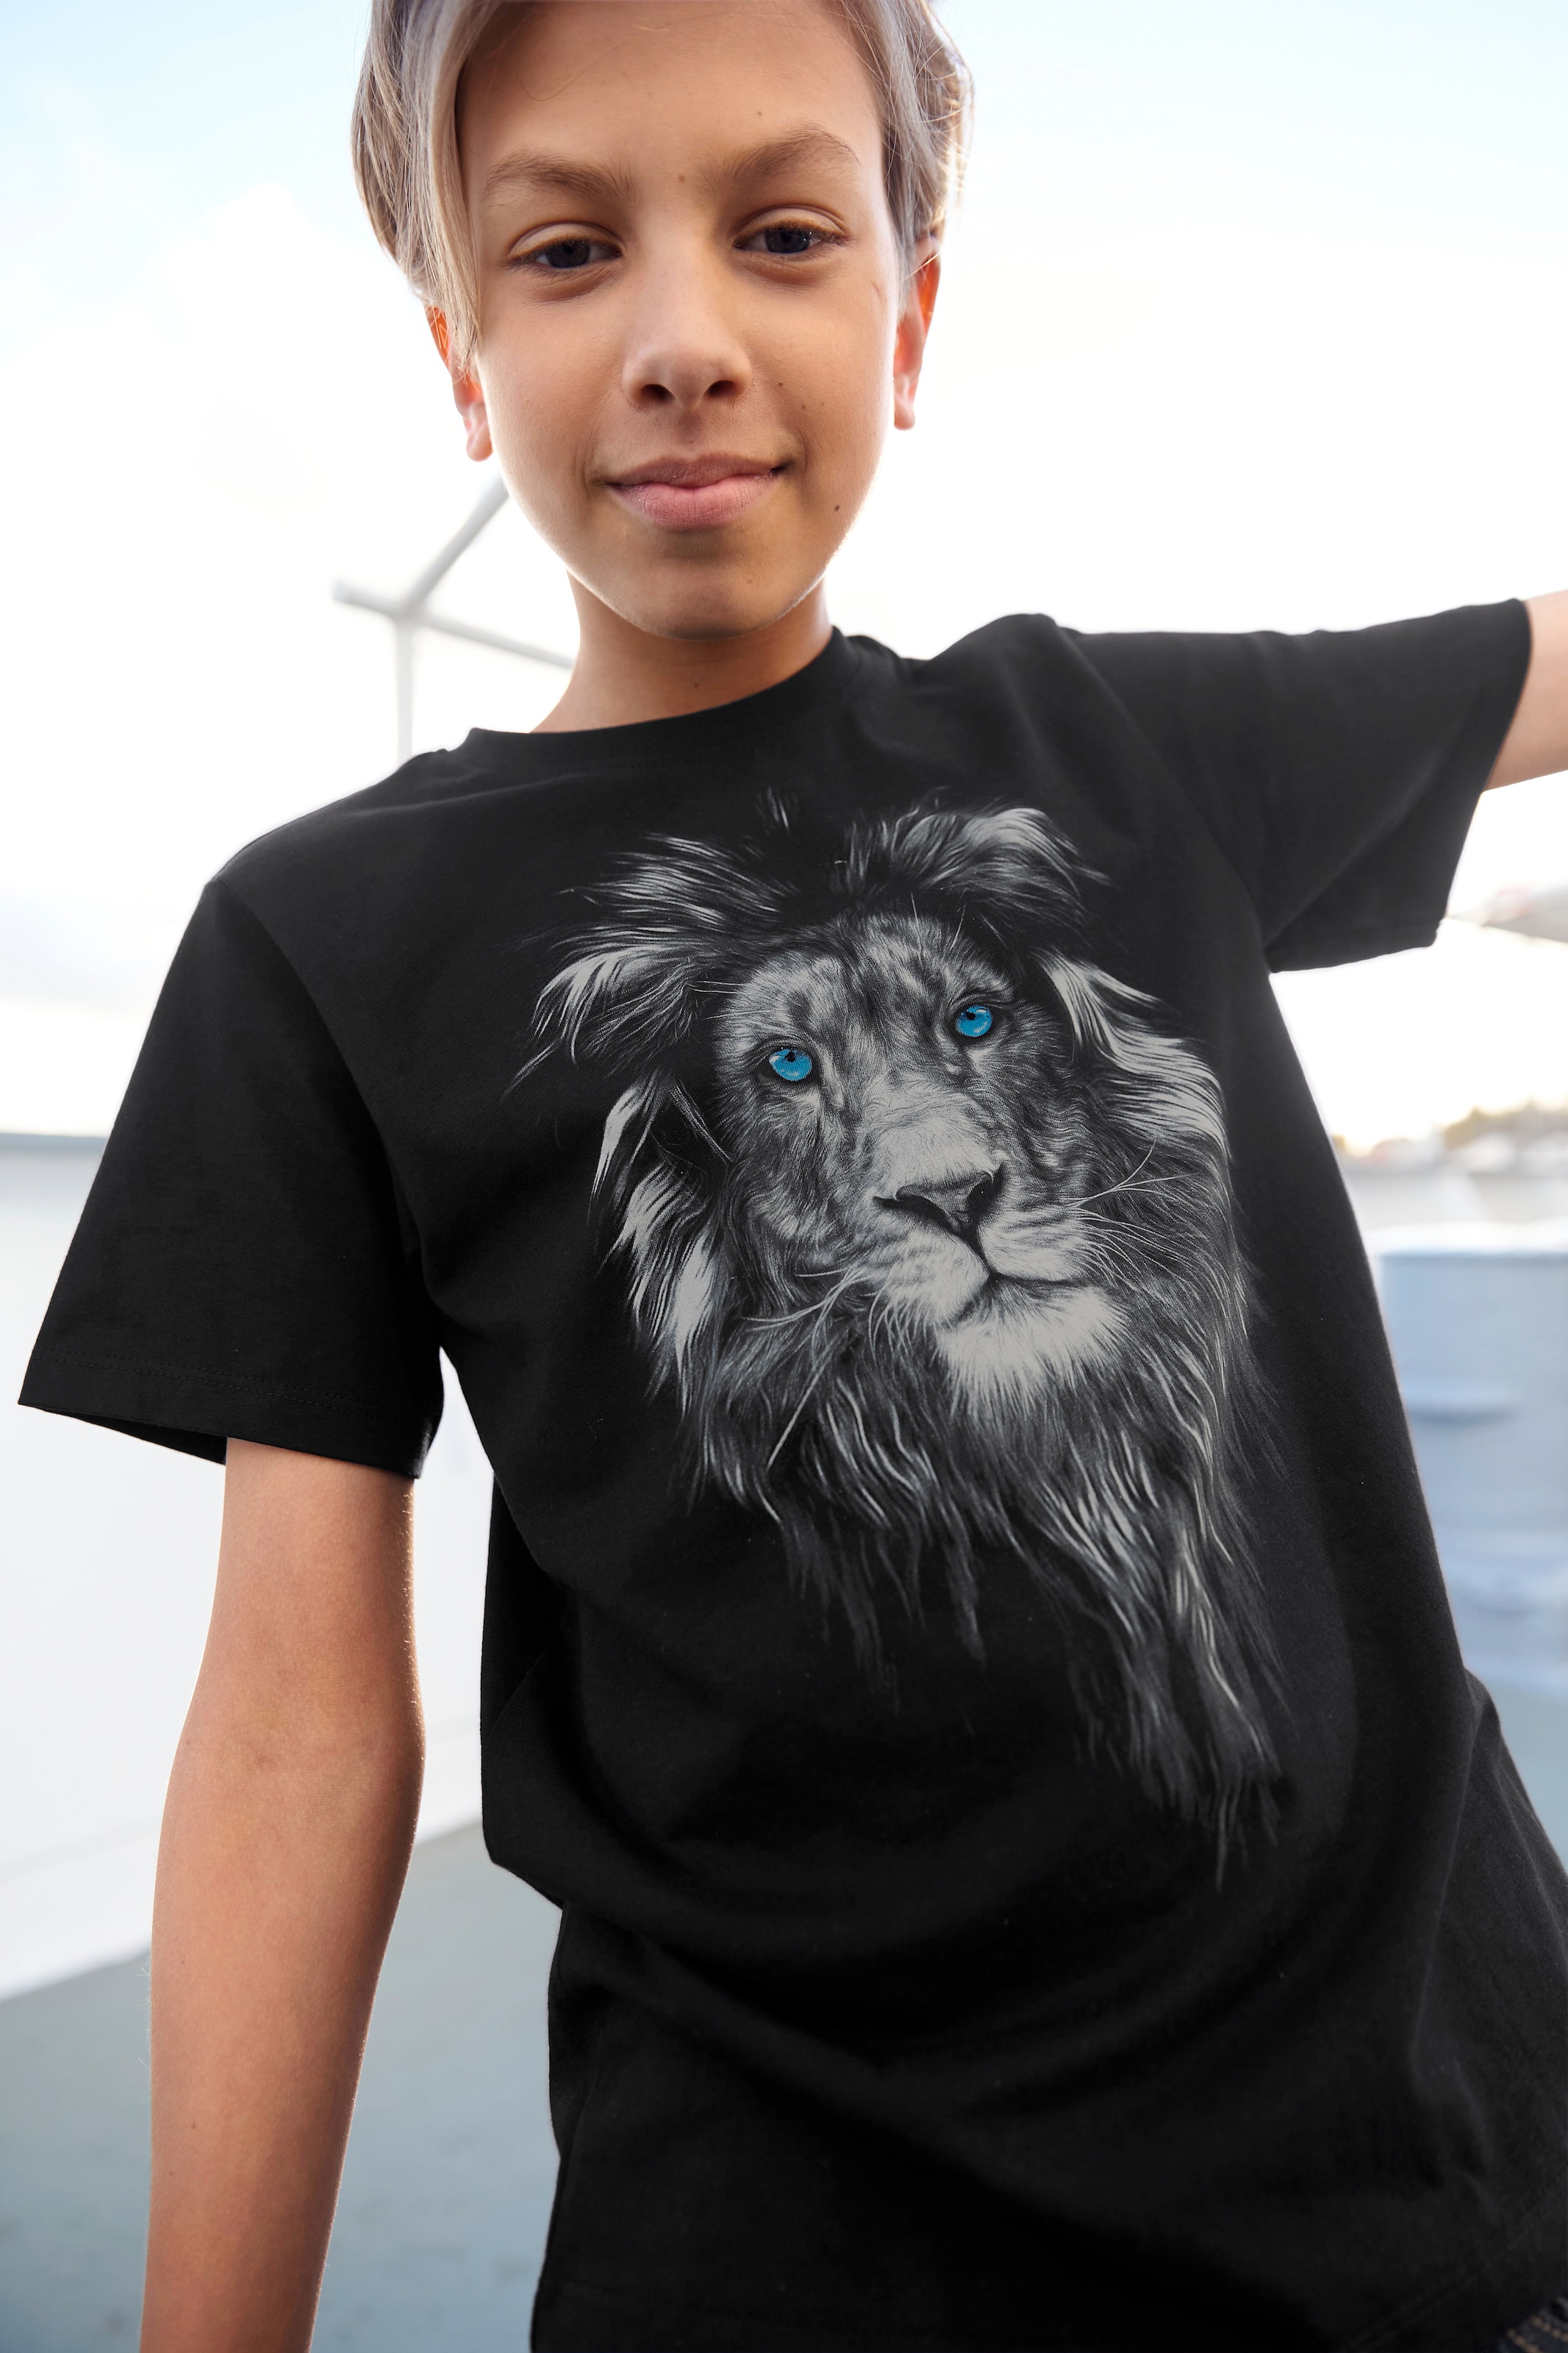 »LION KIDSWORLD WITH bei BLUE T-Shirt EYES«